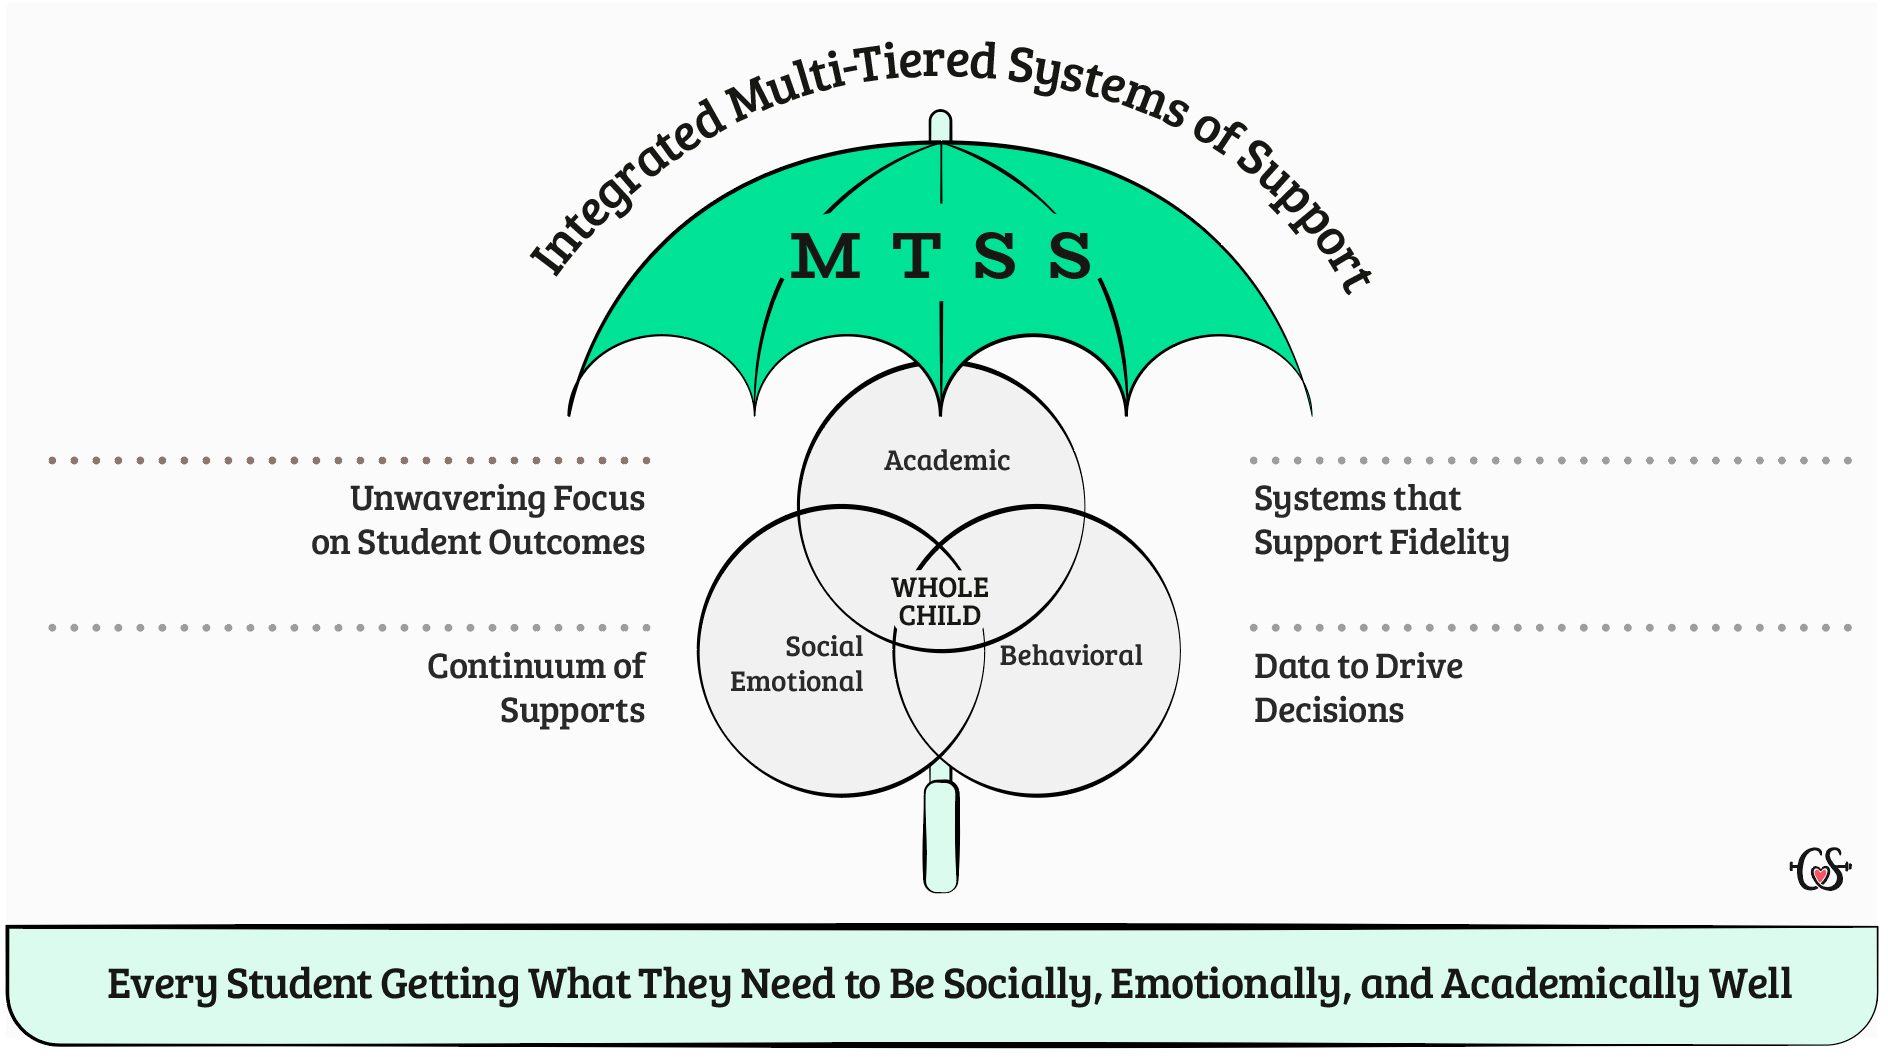 An umbrella image featuring explanations of Integrated Multi-Tiered Systems 
        of Support or MTSS. A three-circle Venn diagram shows circles with Academic, Social Emotional and 
        Behavior with WHOLE CHILD in the center. On the left, Unwavering Focus on Student Outcomes and 
        Continuum of Supports. On the right, Systems that Support Fidelity and Data to Drive Decisions. At the
        bottom: Every Student Getting What They Need to Be Socially, Emotionally, and Academically Well